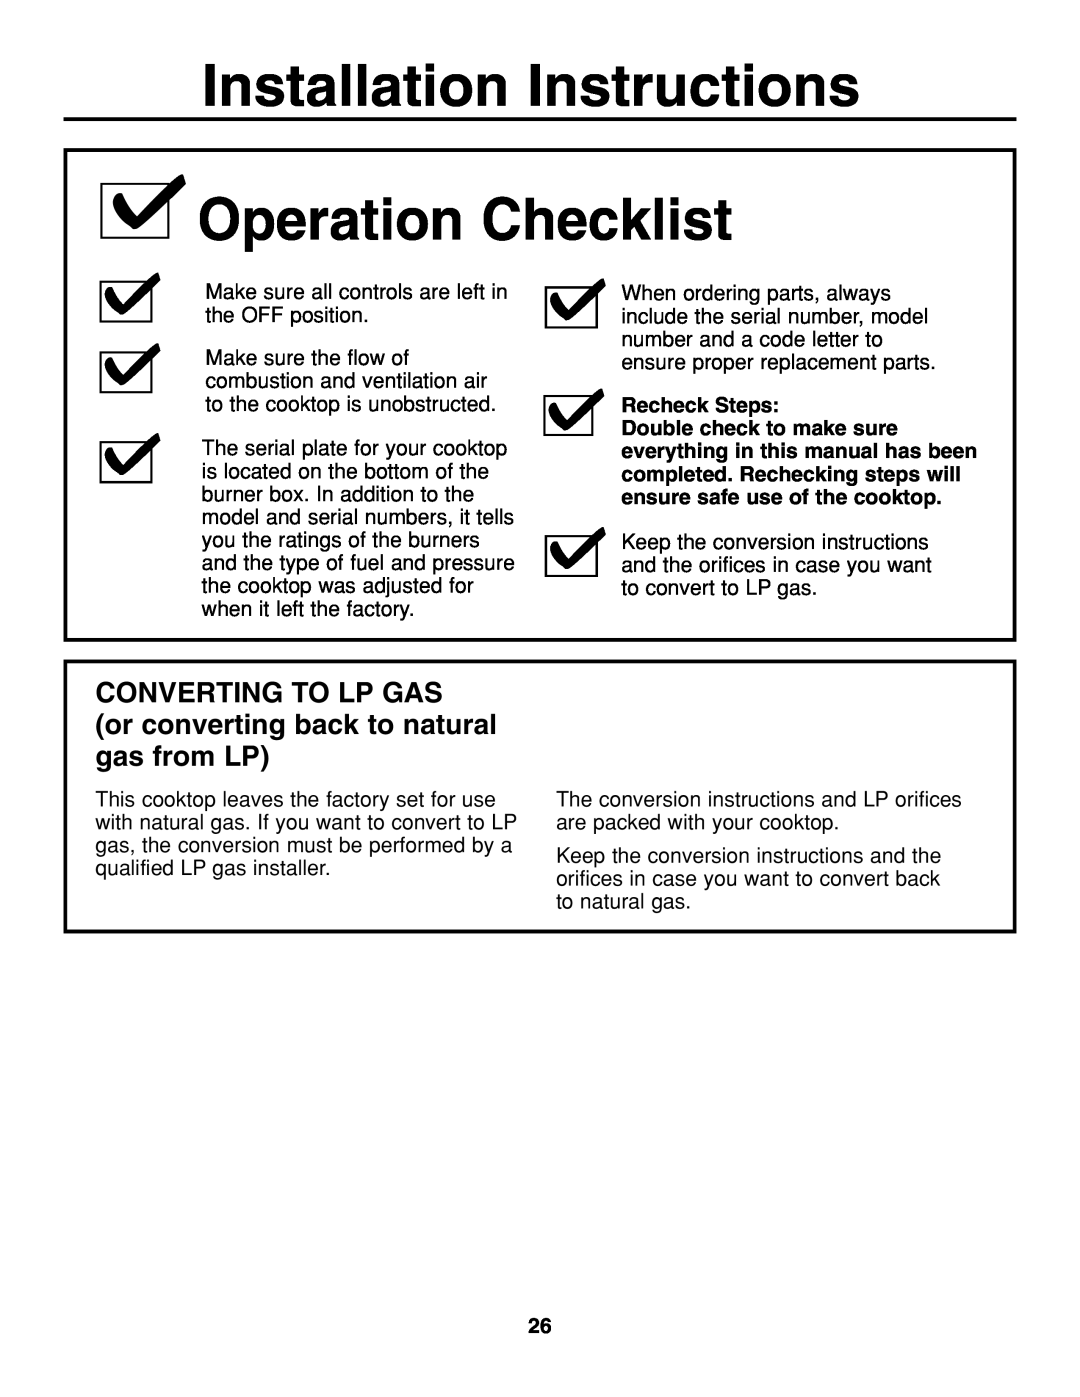 GE JGP337 Installation Instructions Operation Checklist, CONVERTING TO LP GAS or converting back to natural gas from LP 